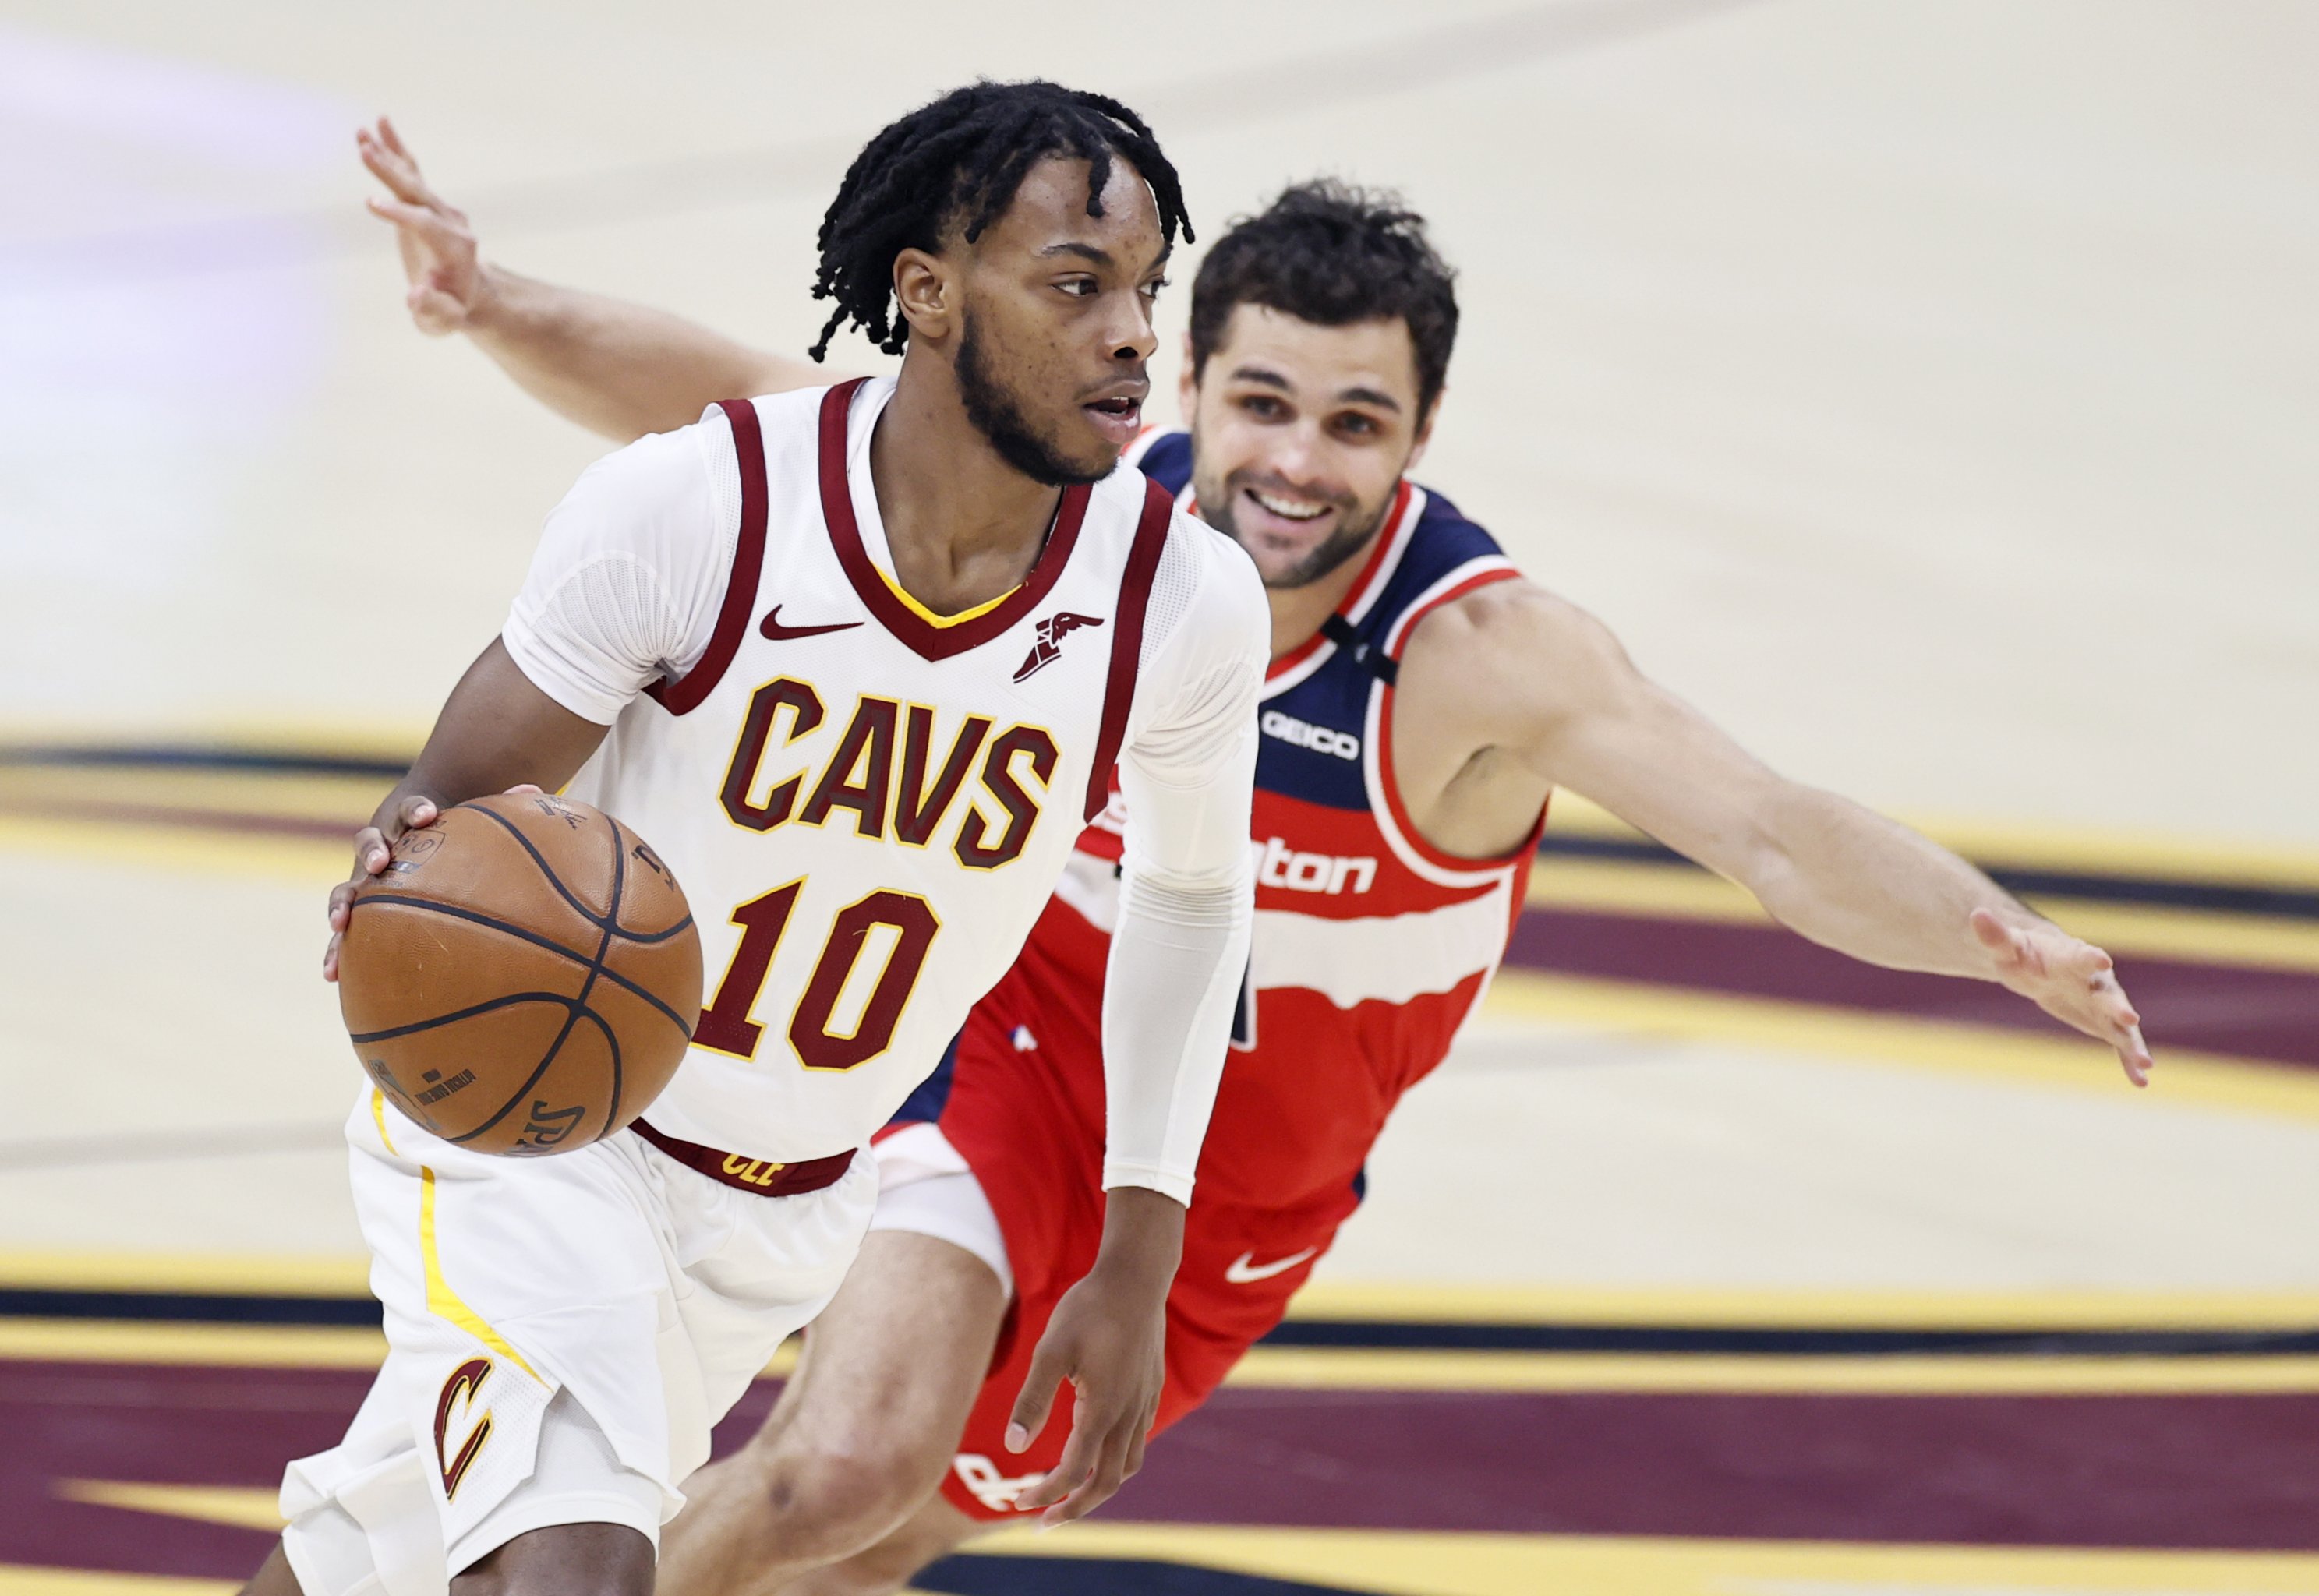 Cleveland Cavaliers guard Ricky Rubio isn't sure when he'll return